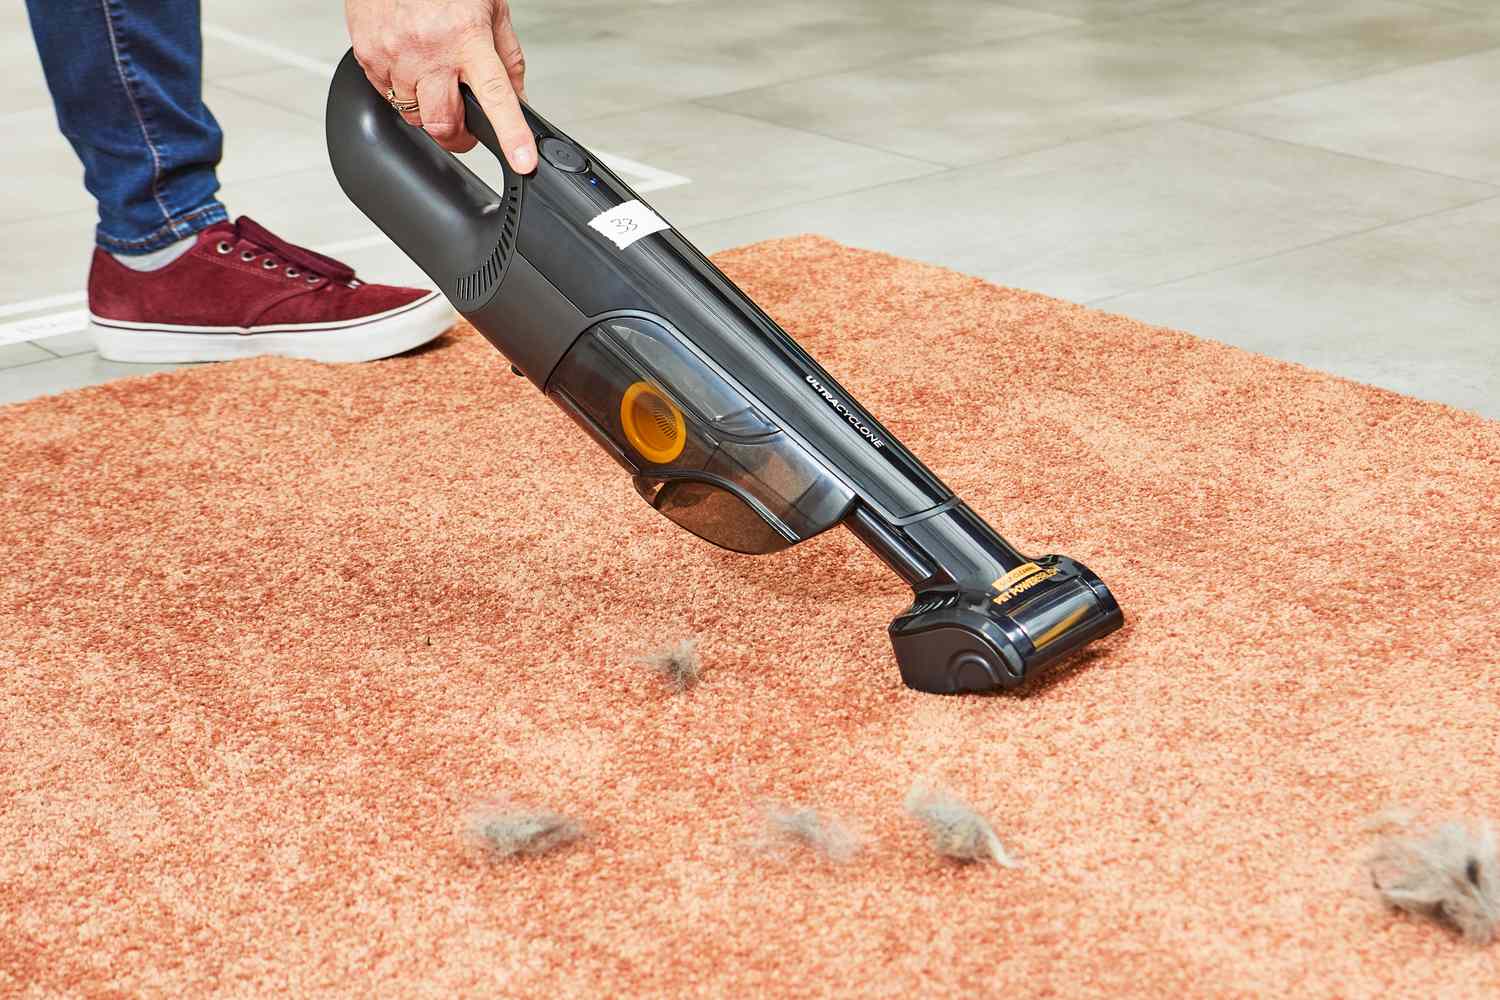 Shark UltraCyclone Pet Pro+ Cordless Handheld Vacuum used to clean dust on the carpet